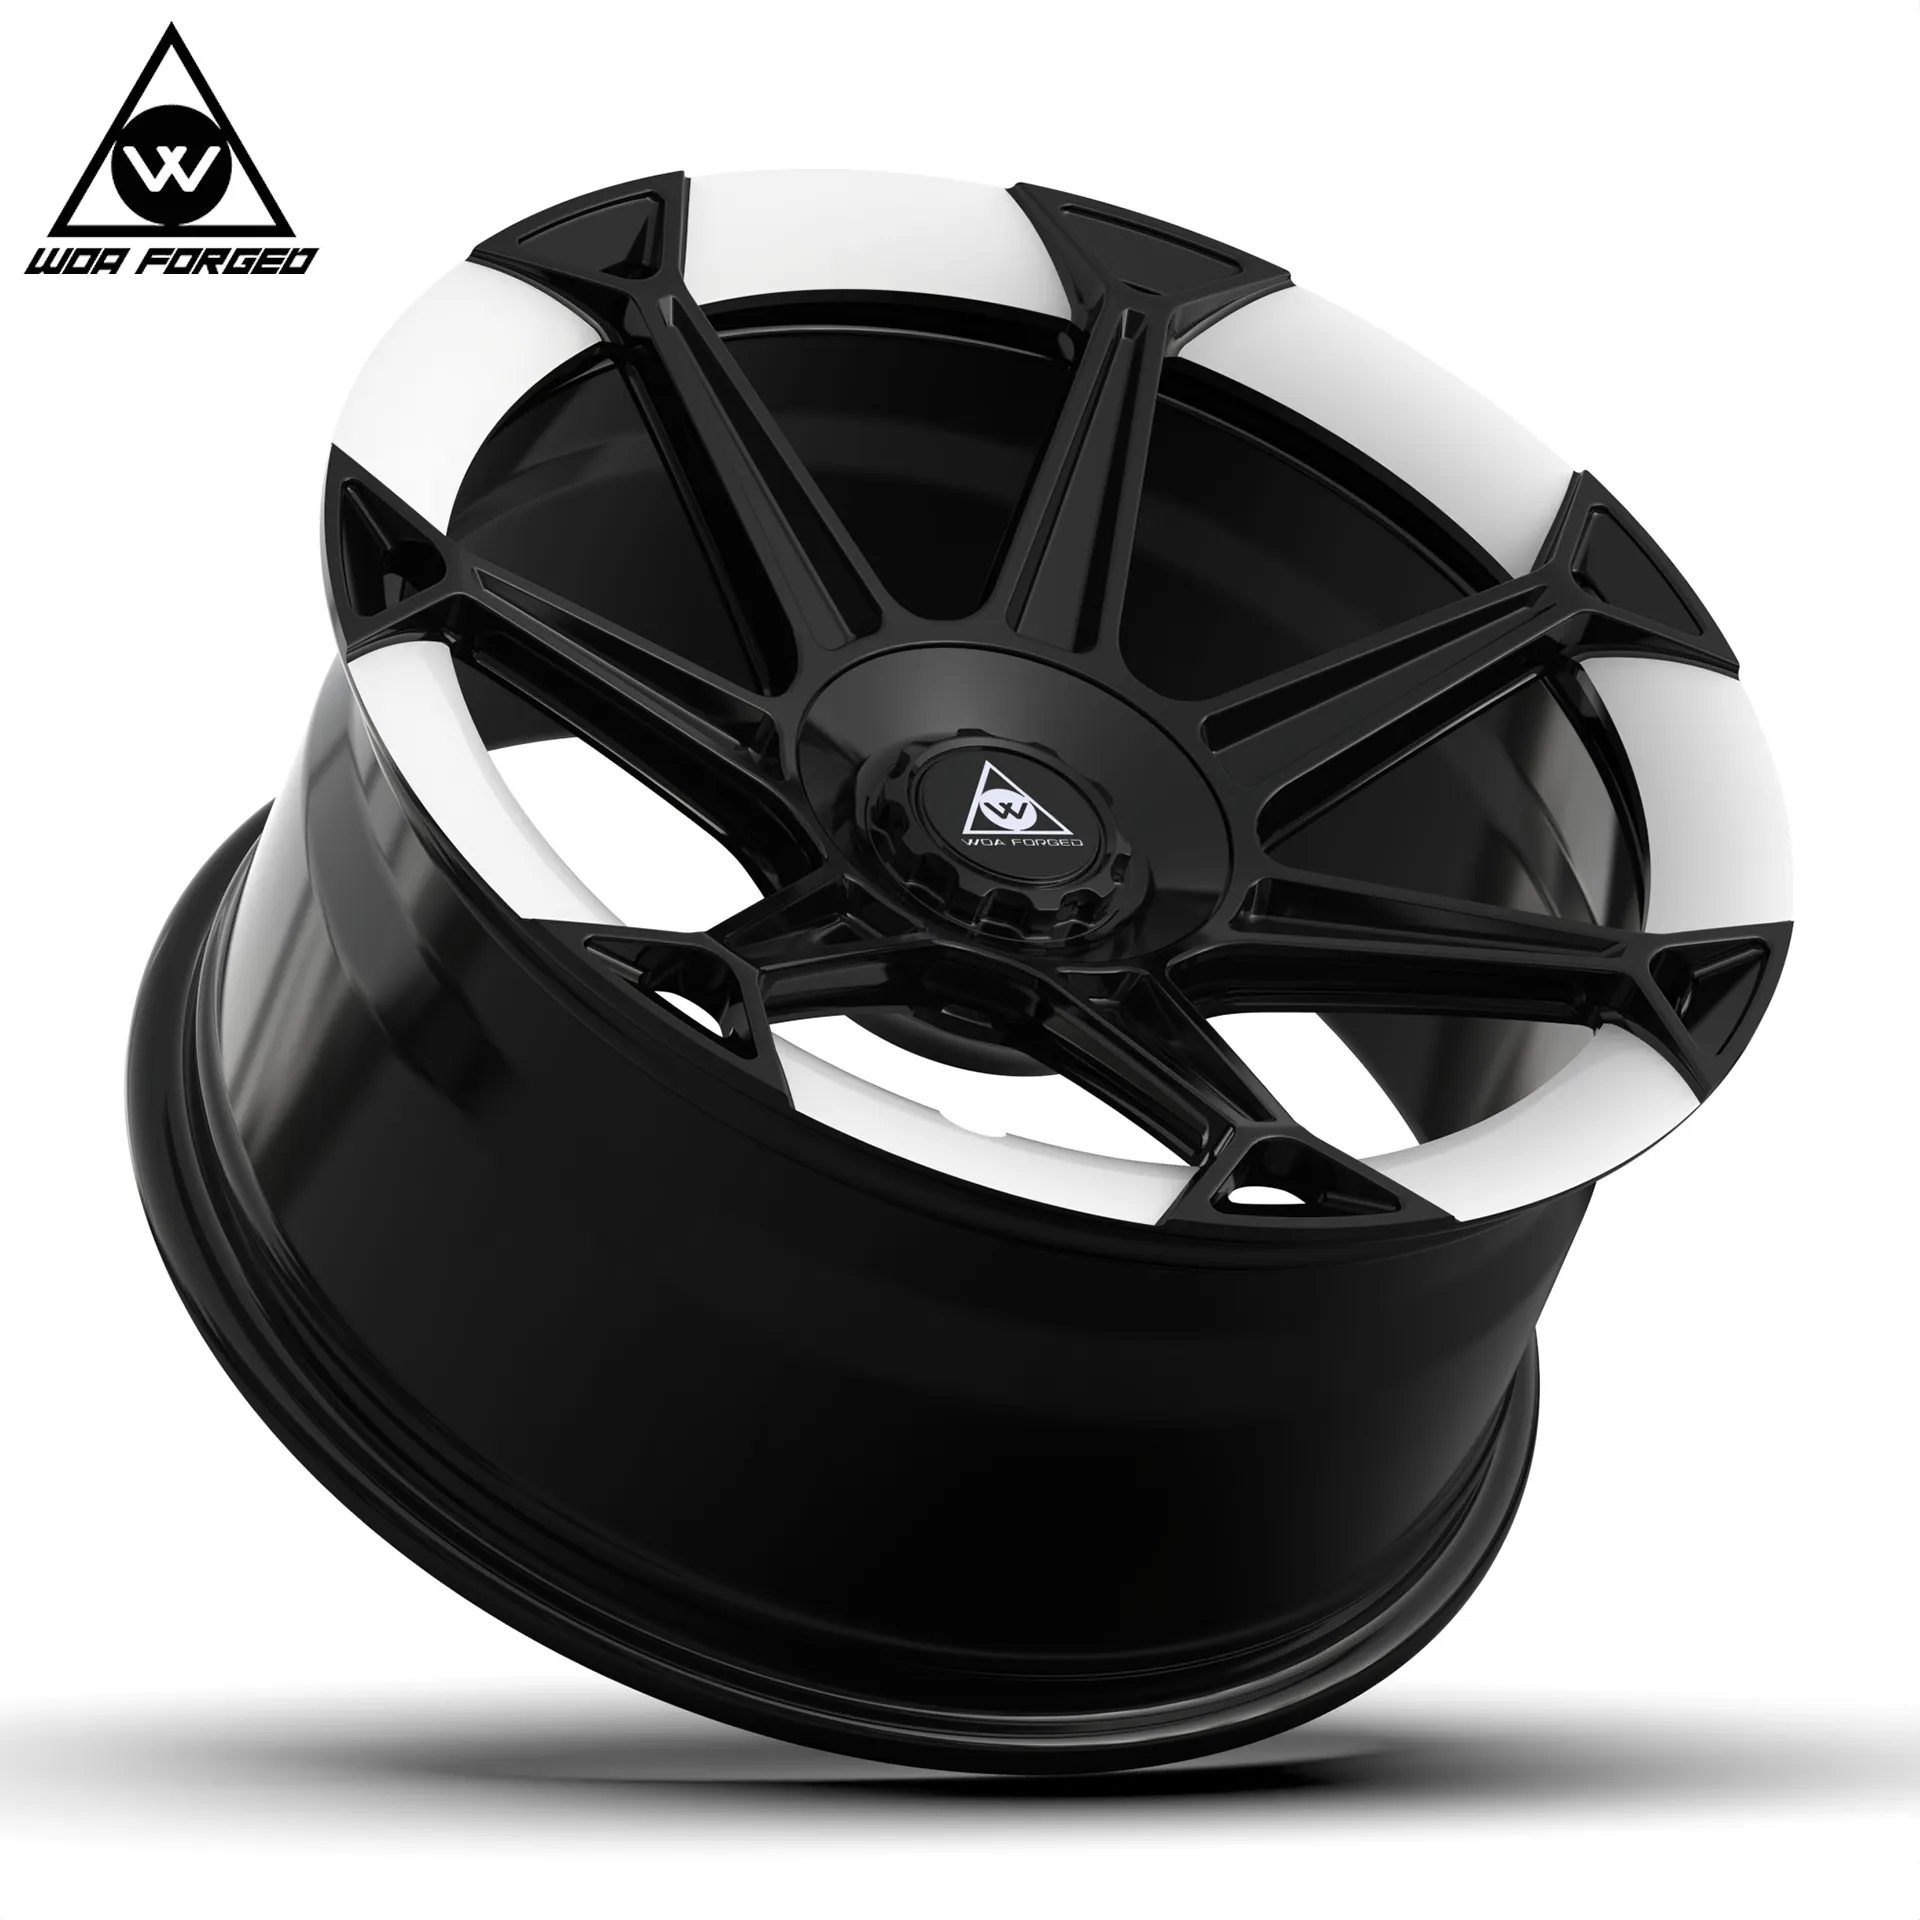 lug cover plate wheels Custom Aluminum Alloy 1-PC Rims Staggered 16 17 18 19 20 21 22 23 Inches Forged Car Wheels For M5 X6 X5